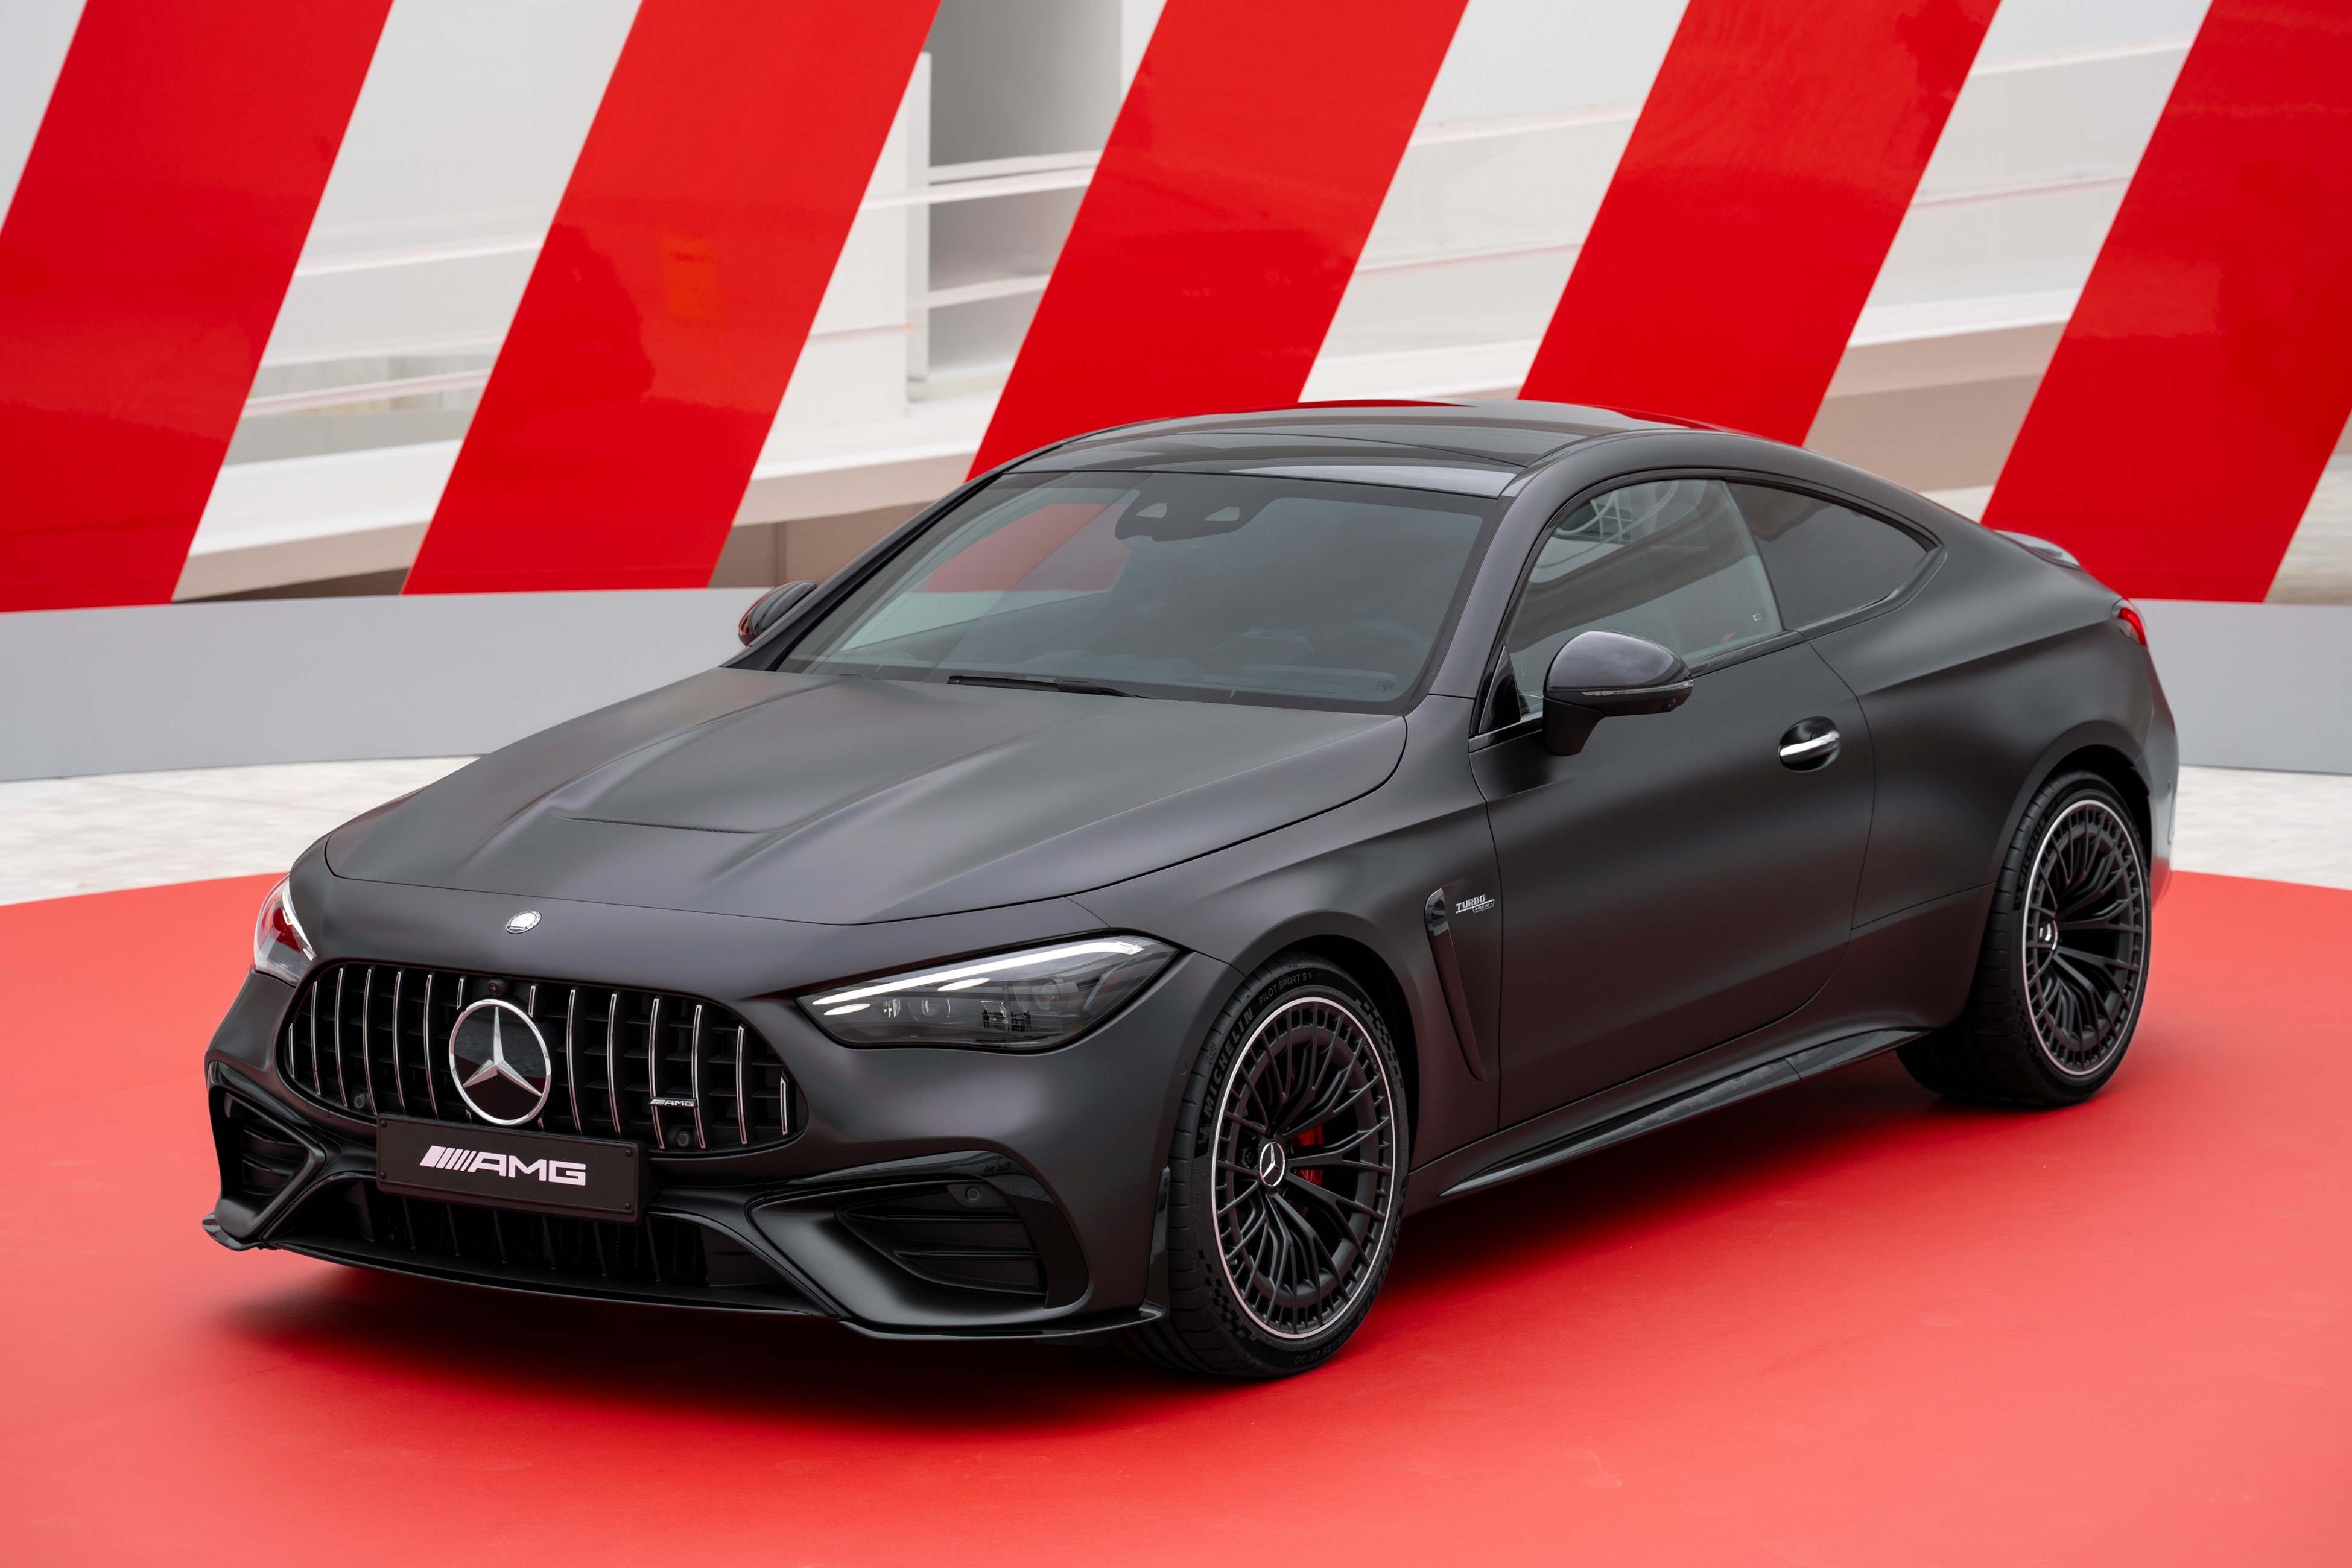 New MercedesAMG CLE 53 Coupe has wider stance, increased horsepower